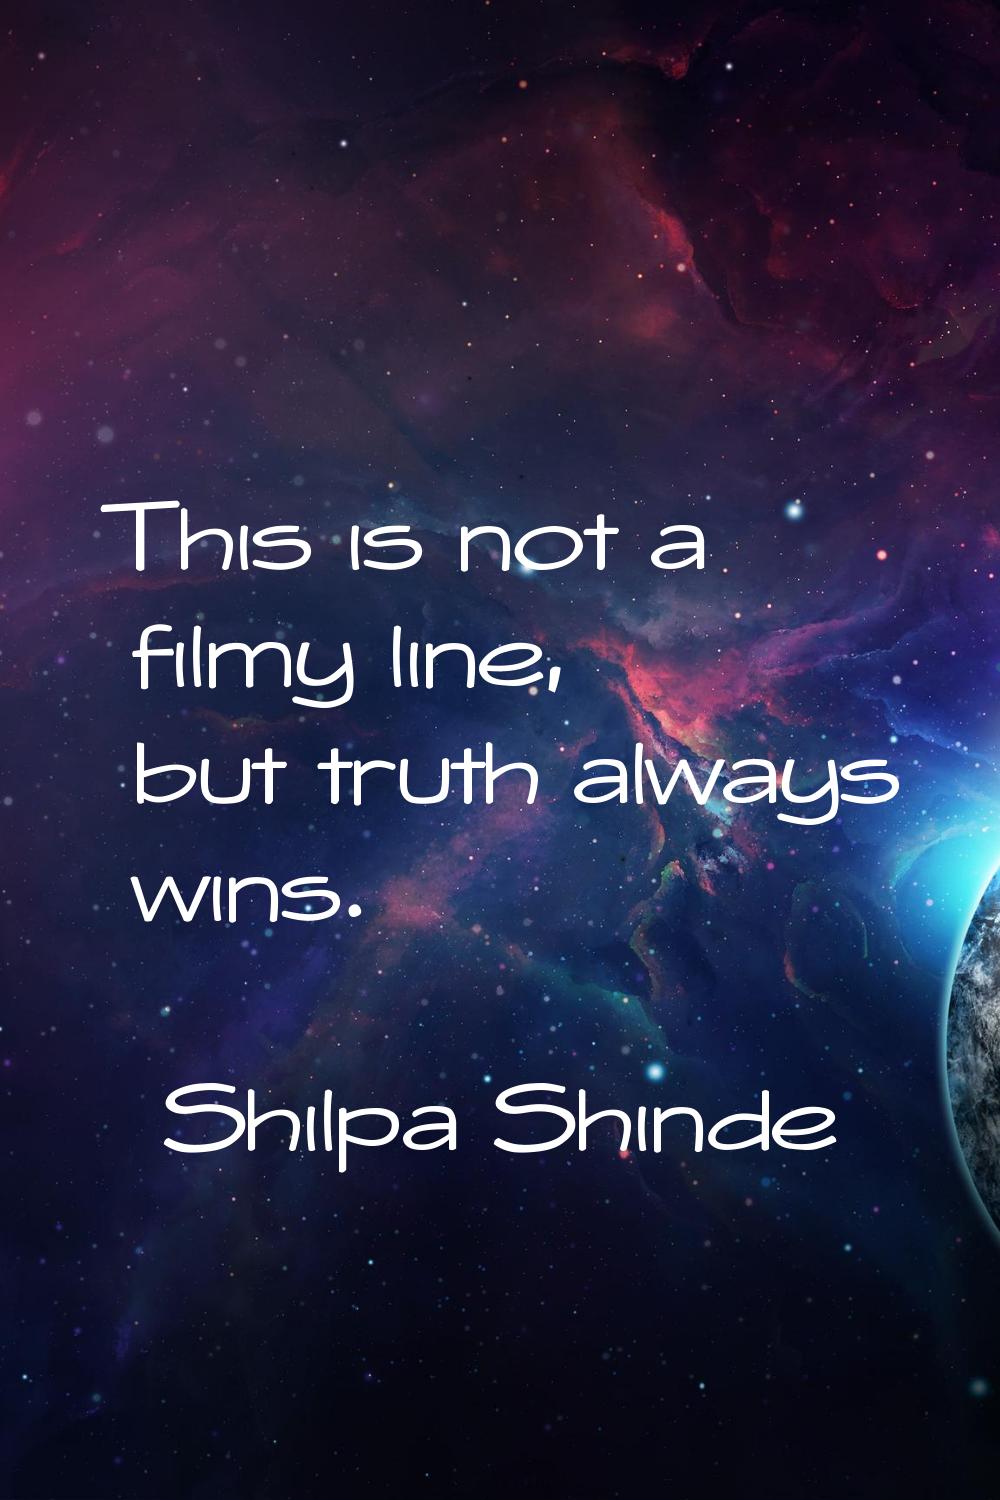 This is not a filmy line, but truth always wins.